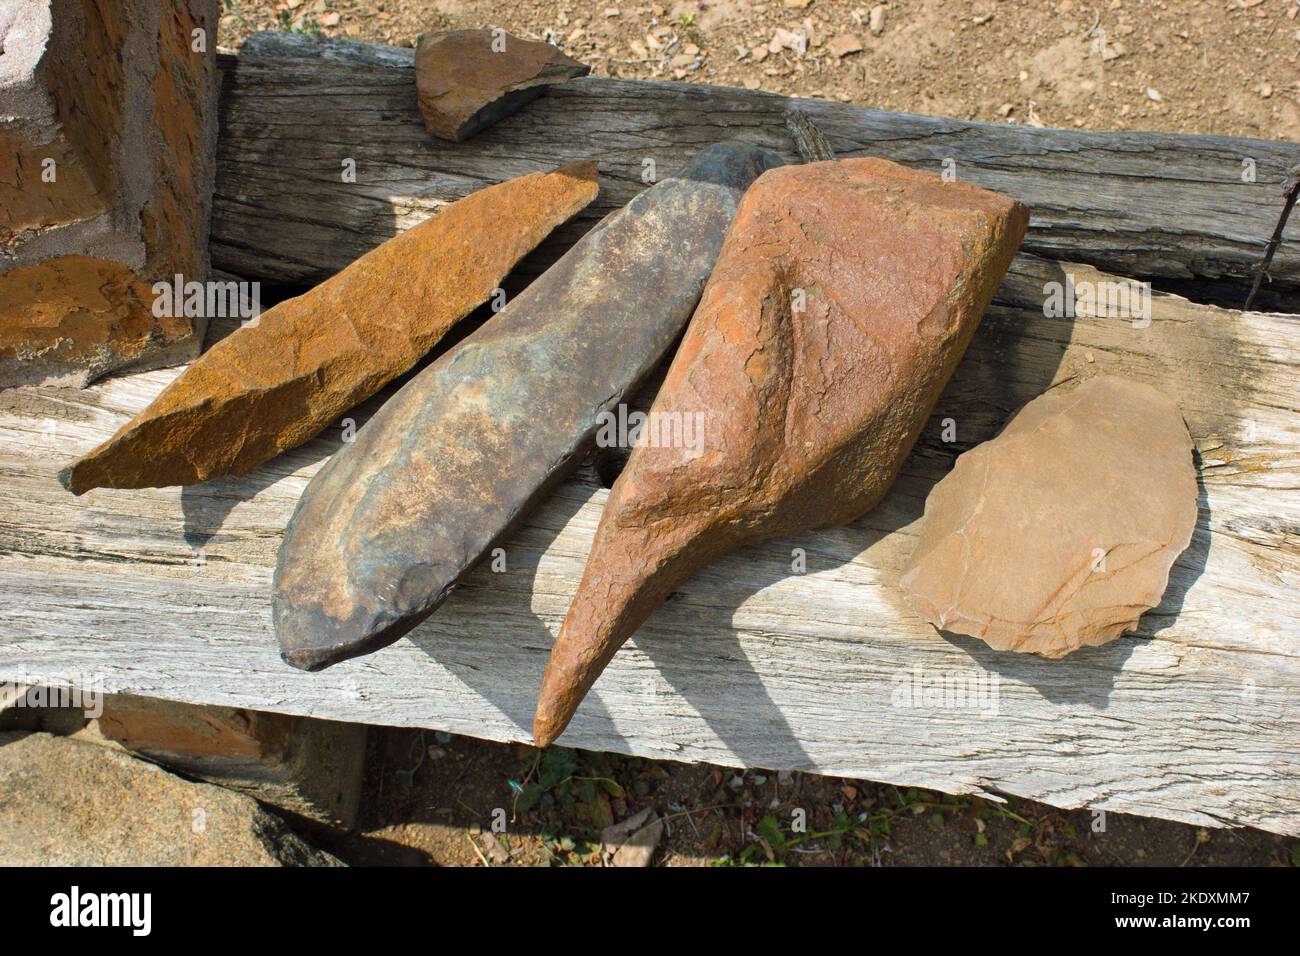 Antique and historic stone tools dug up in South Africa, used for digging for food  and cutting meat and hides Stock Photo